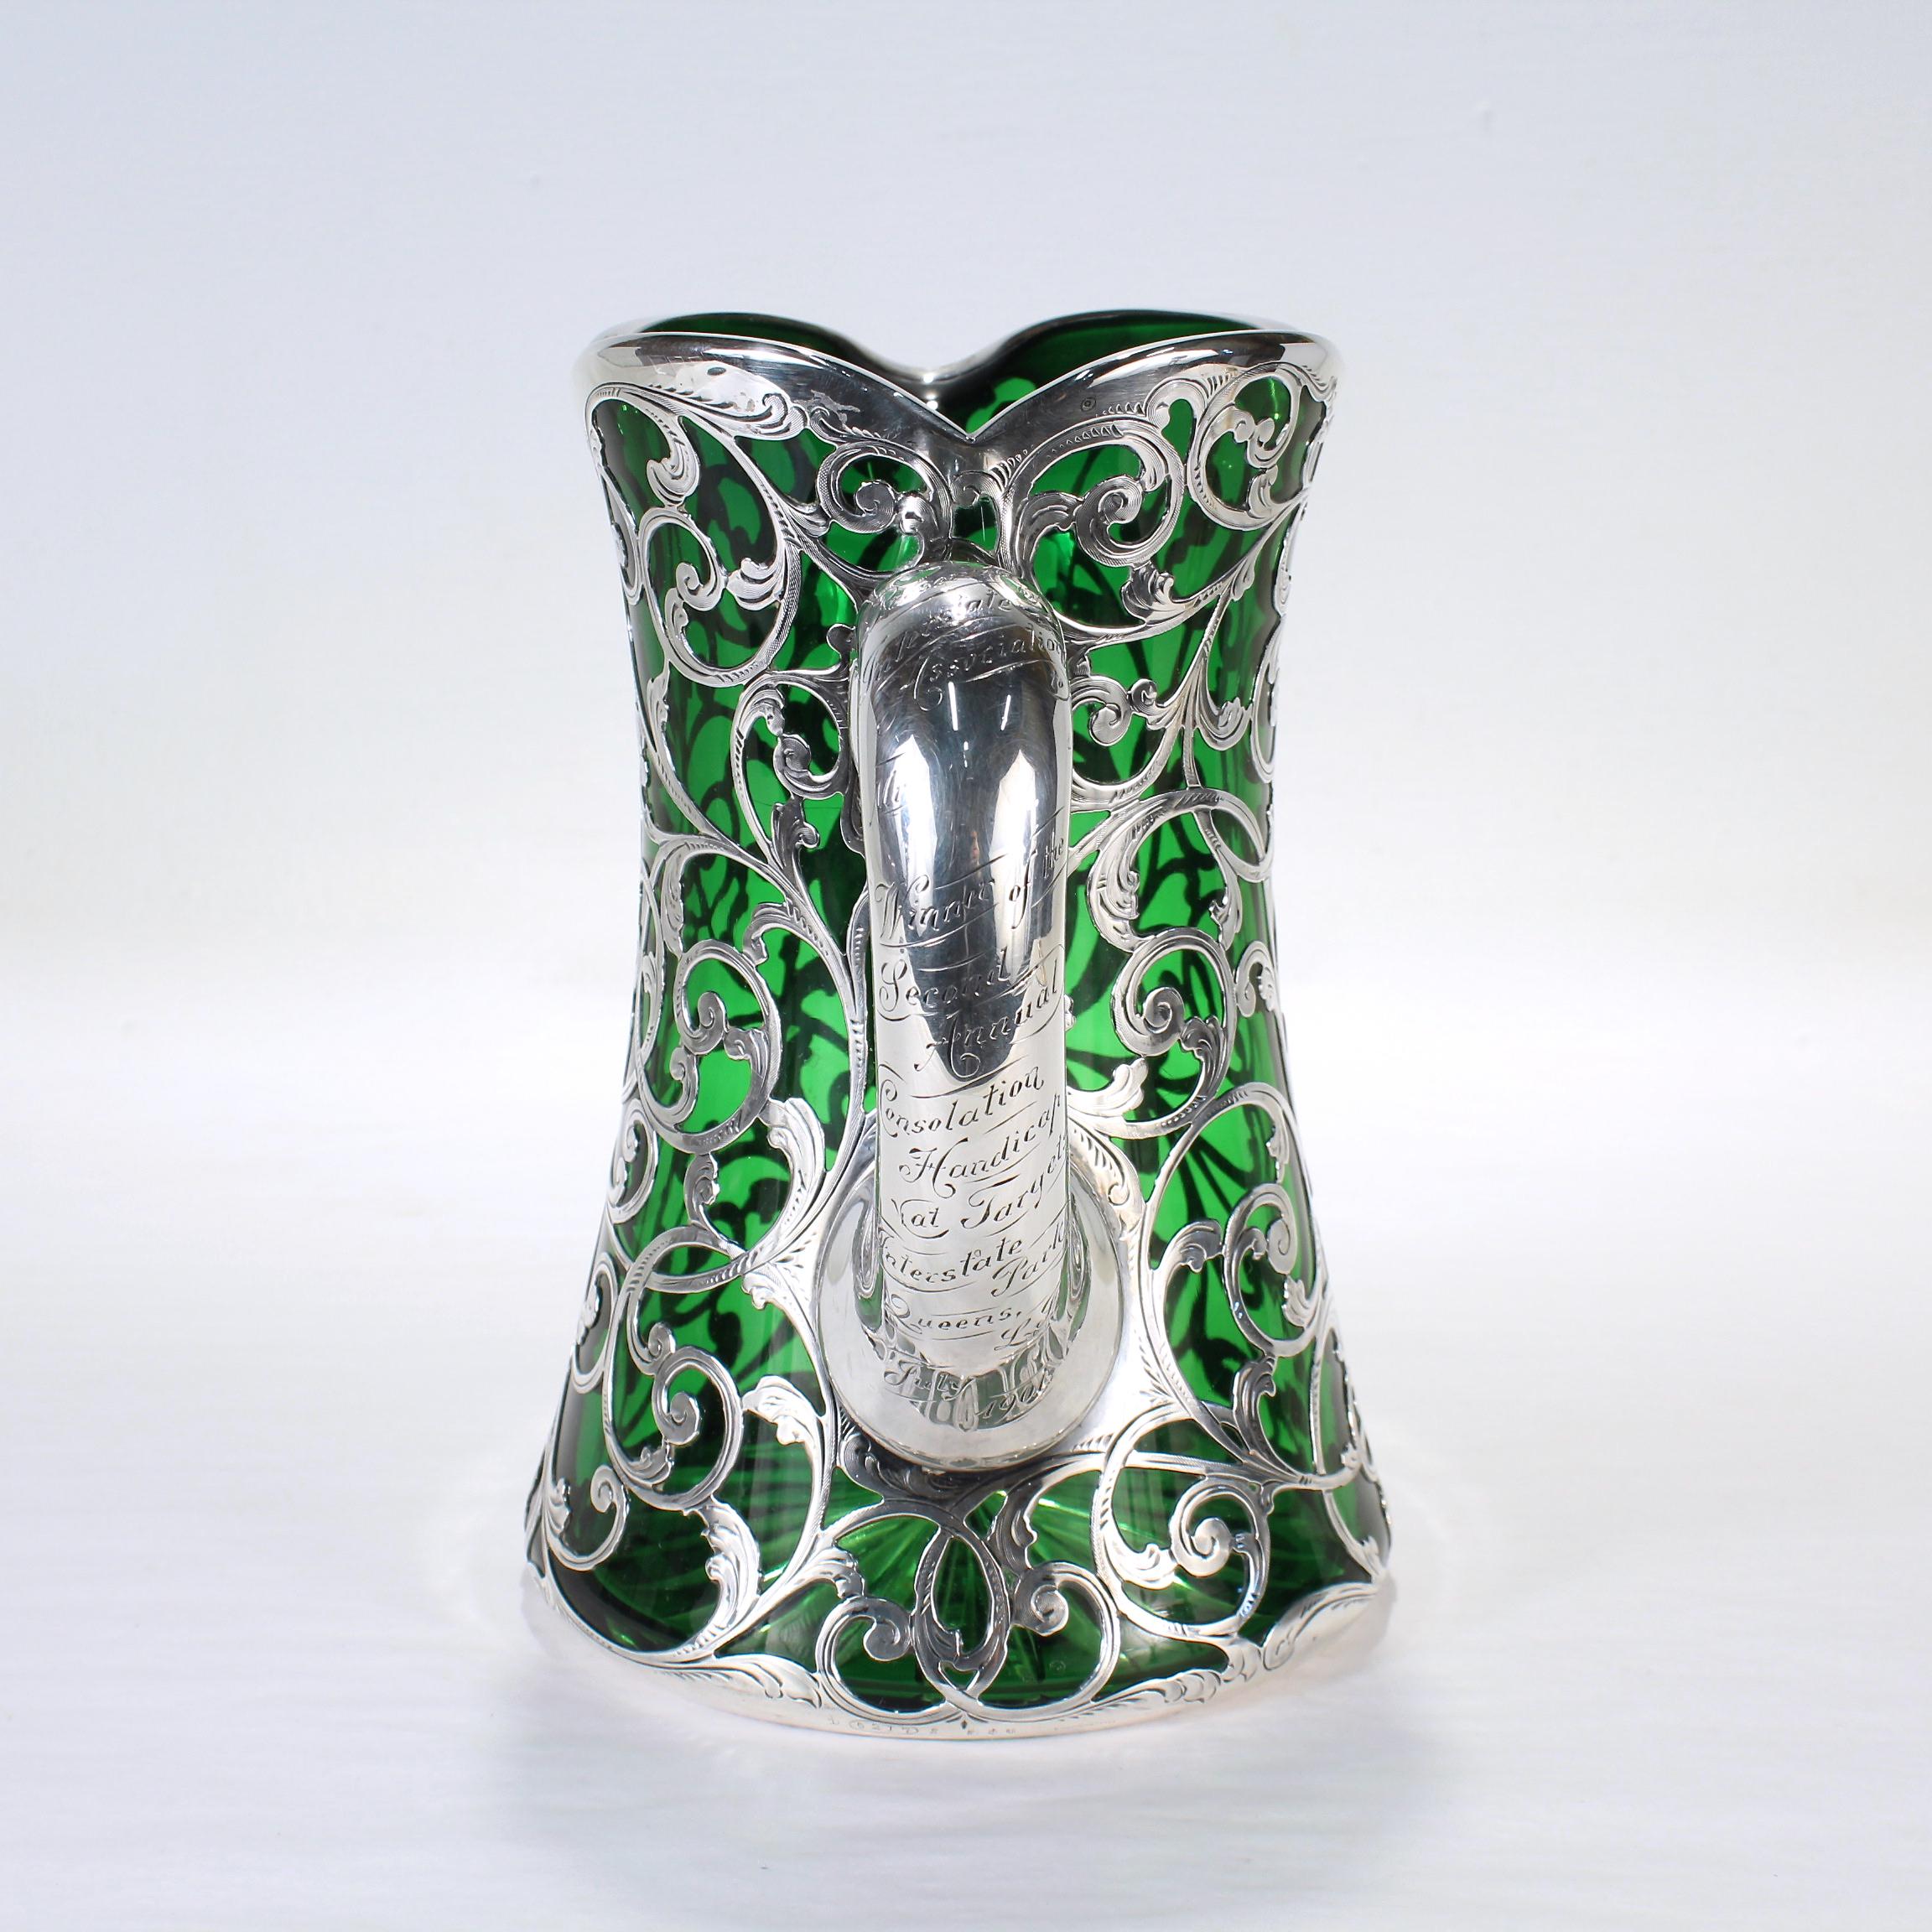 Gilded Age Antique Gorham Green Glass & Sterling Silver Overlay Water or Cocktail Pitcher